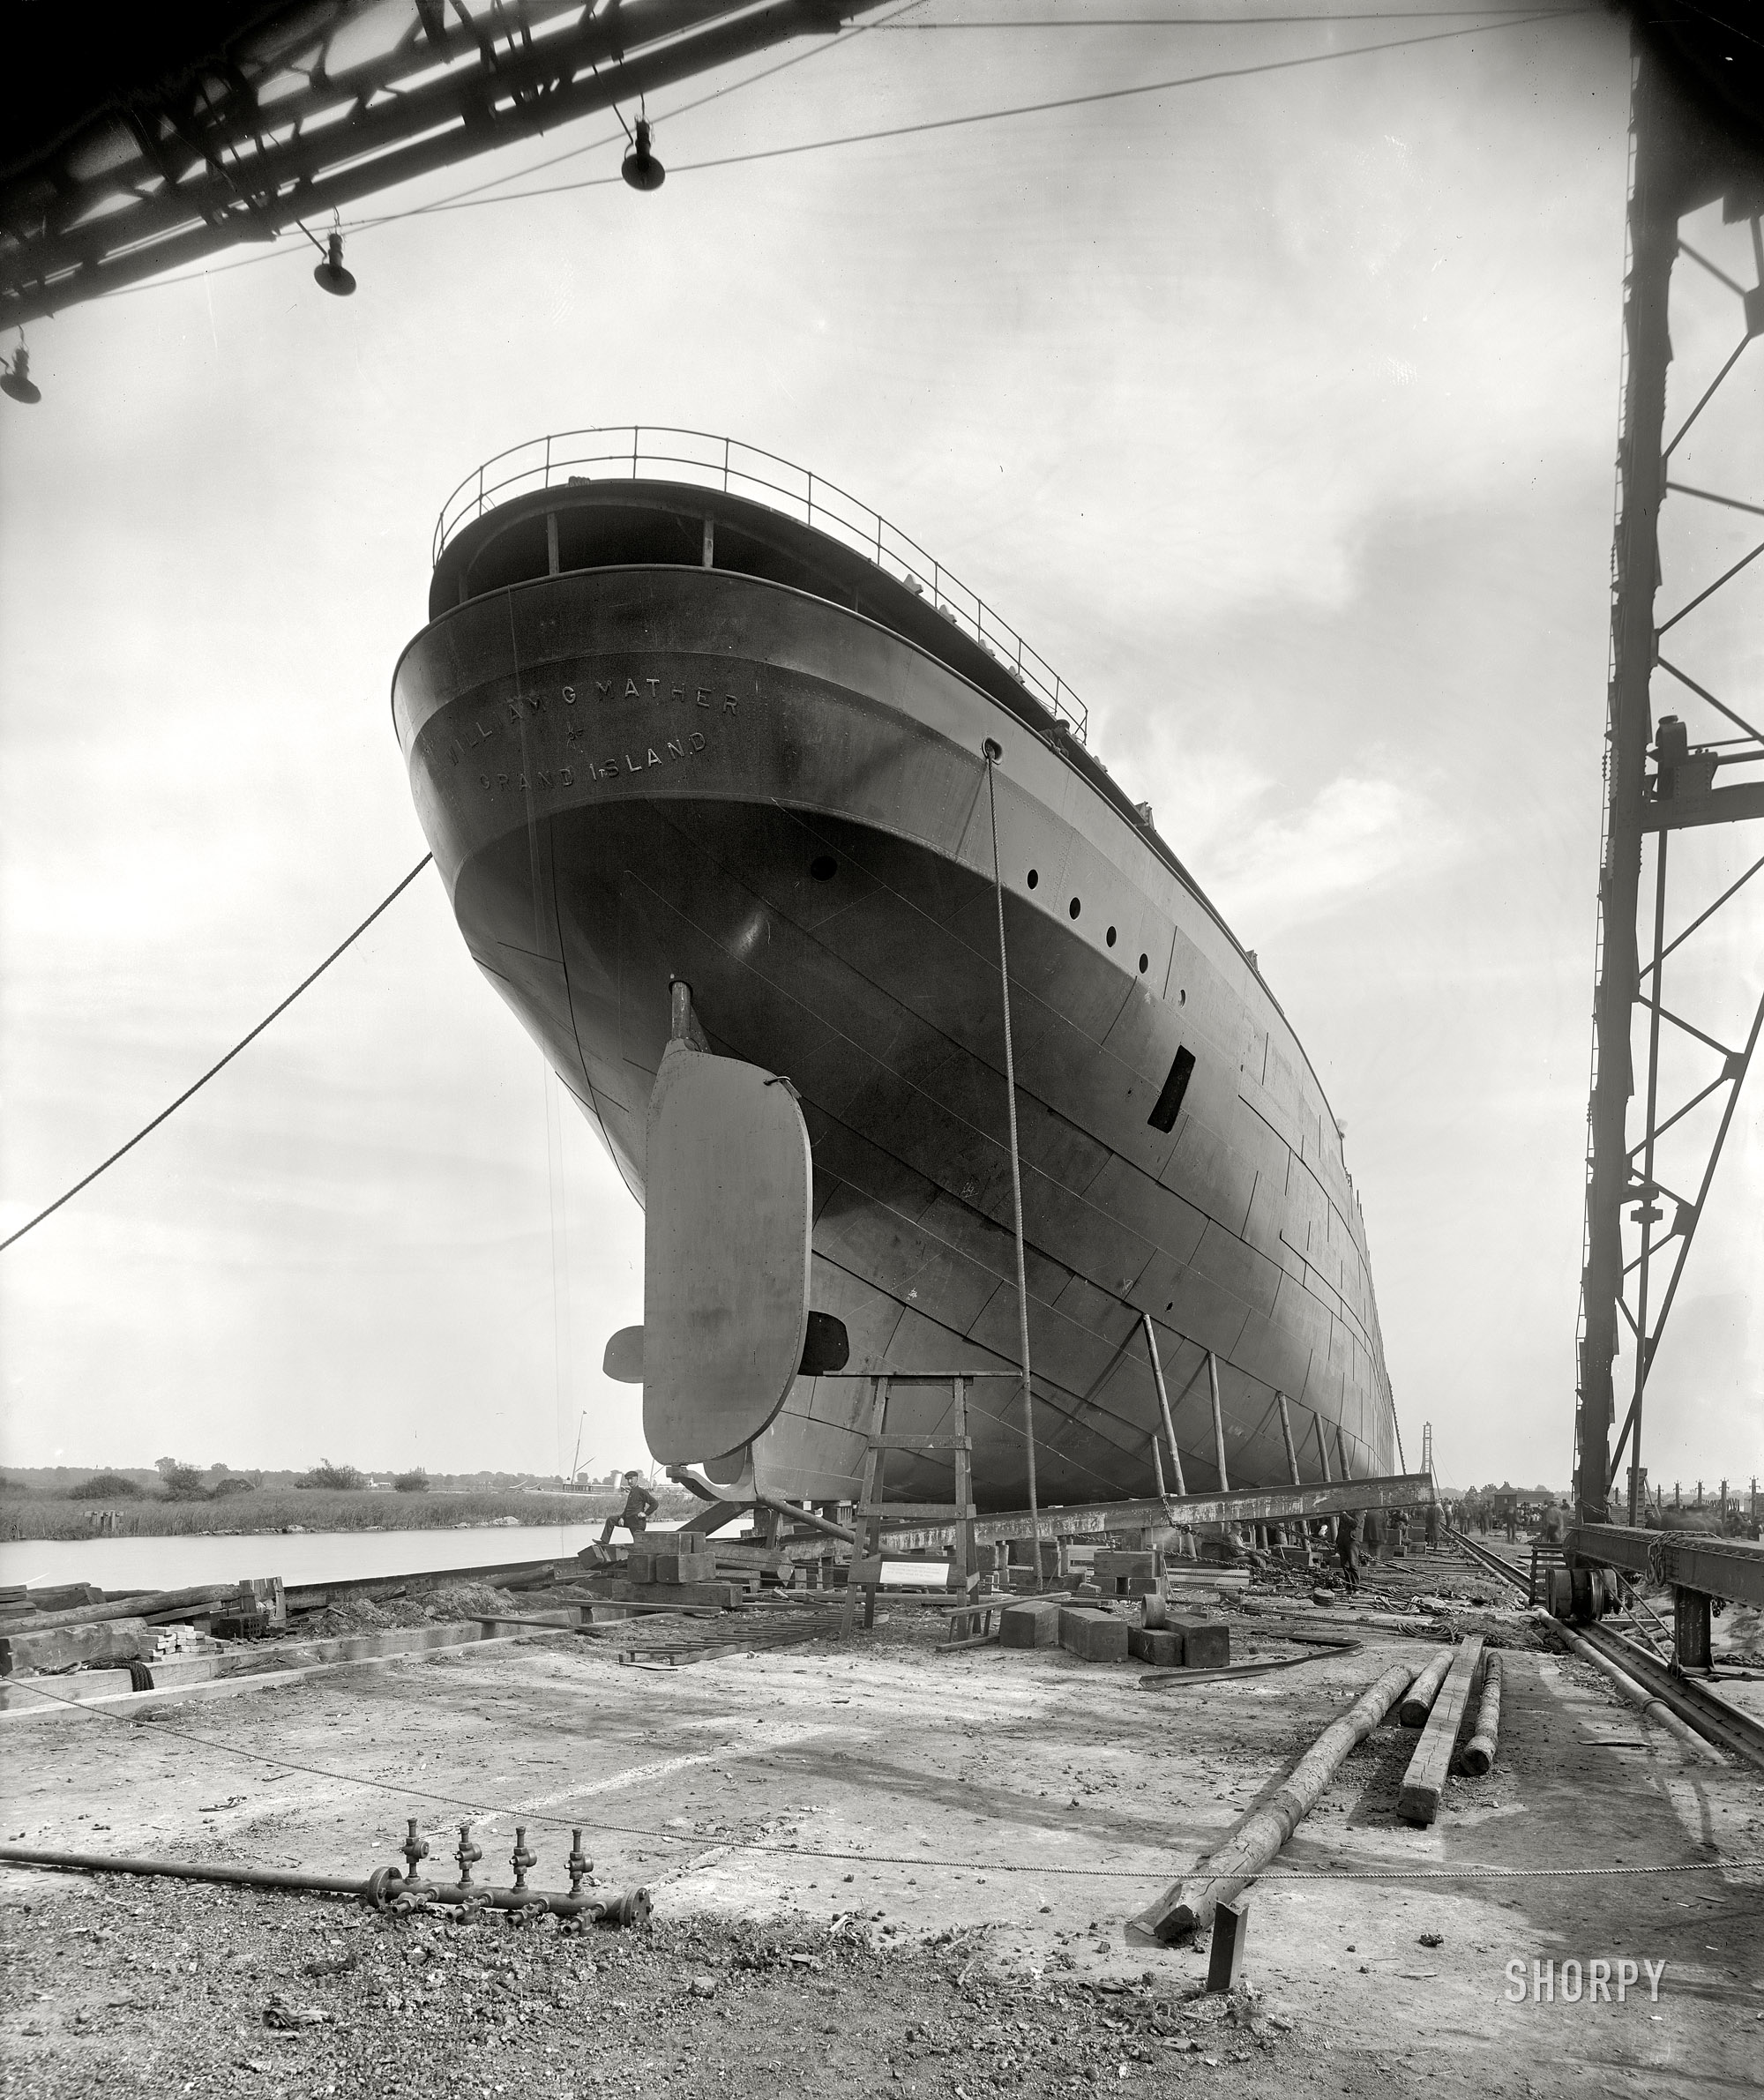 Ecorse, Michigan, 1905. "S.S. William G. Mather, stern view before launch." 8x10 inch dry plate glass negative, Detroit Publishing Company. View full size.